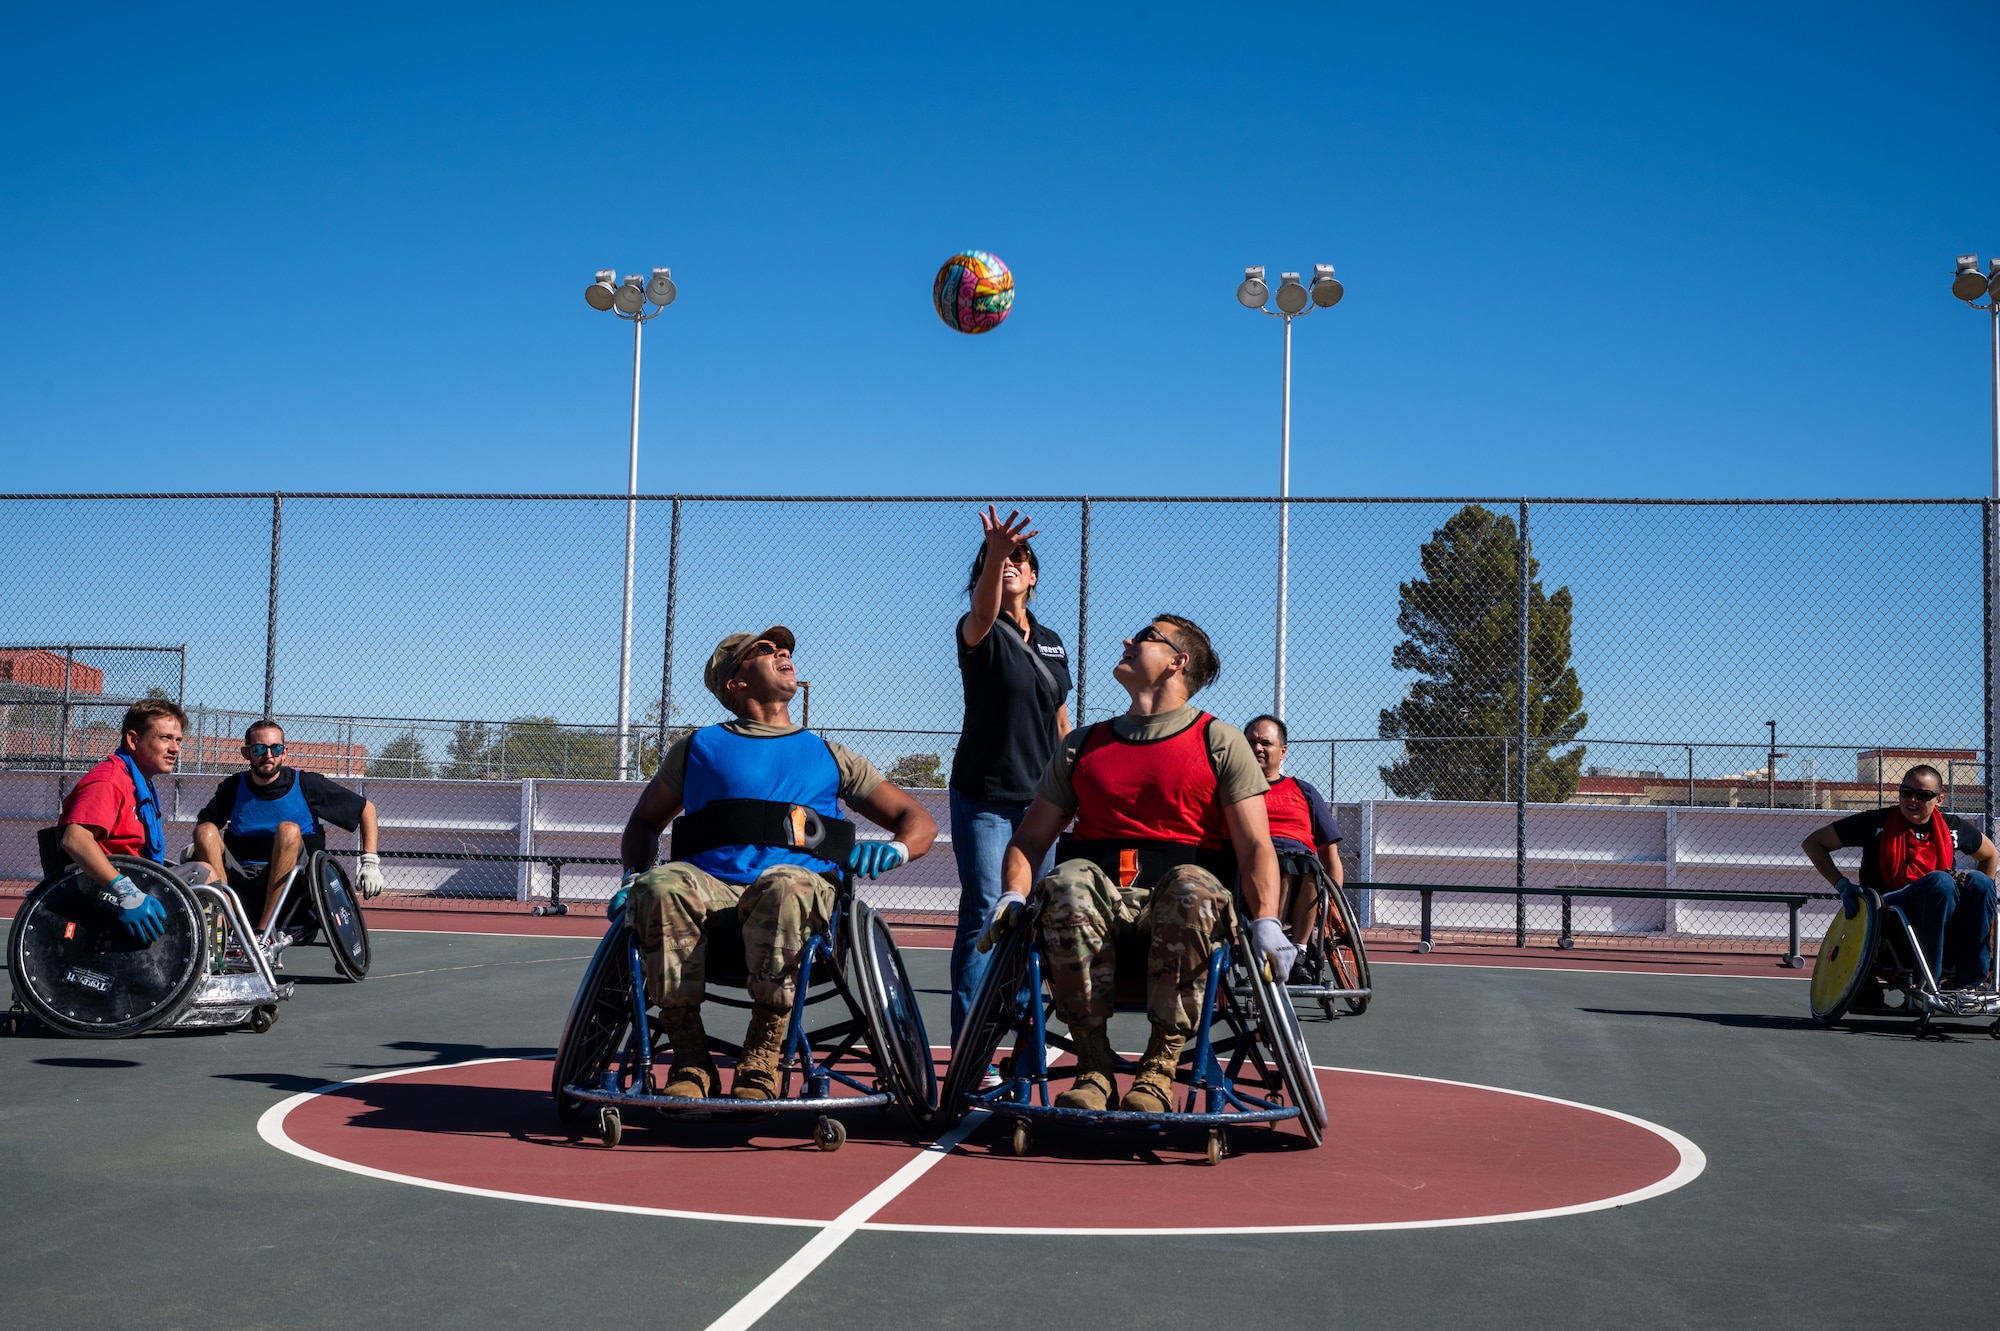 Airmen from Edwards Air Force Base participate in a game of wheelchair rugby during a National Disability Employment Awareness Month observance at the Rosburg Fitness Center, Oct. 29, at Edwards Air Force Base, California.